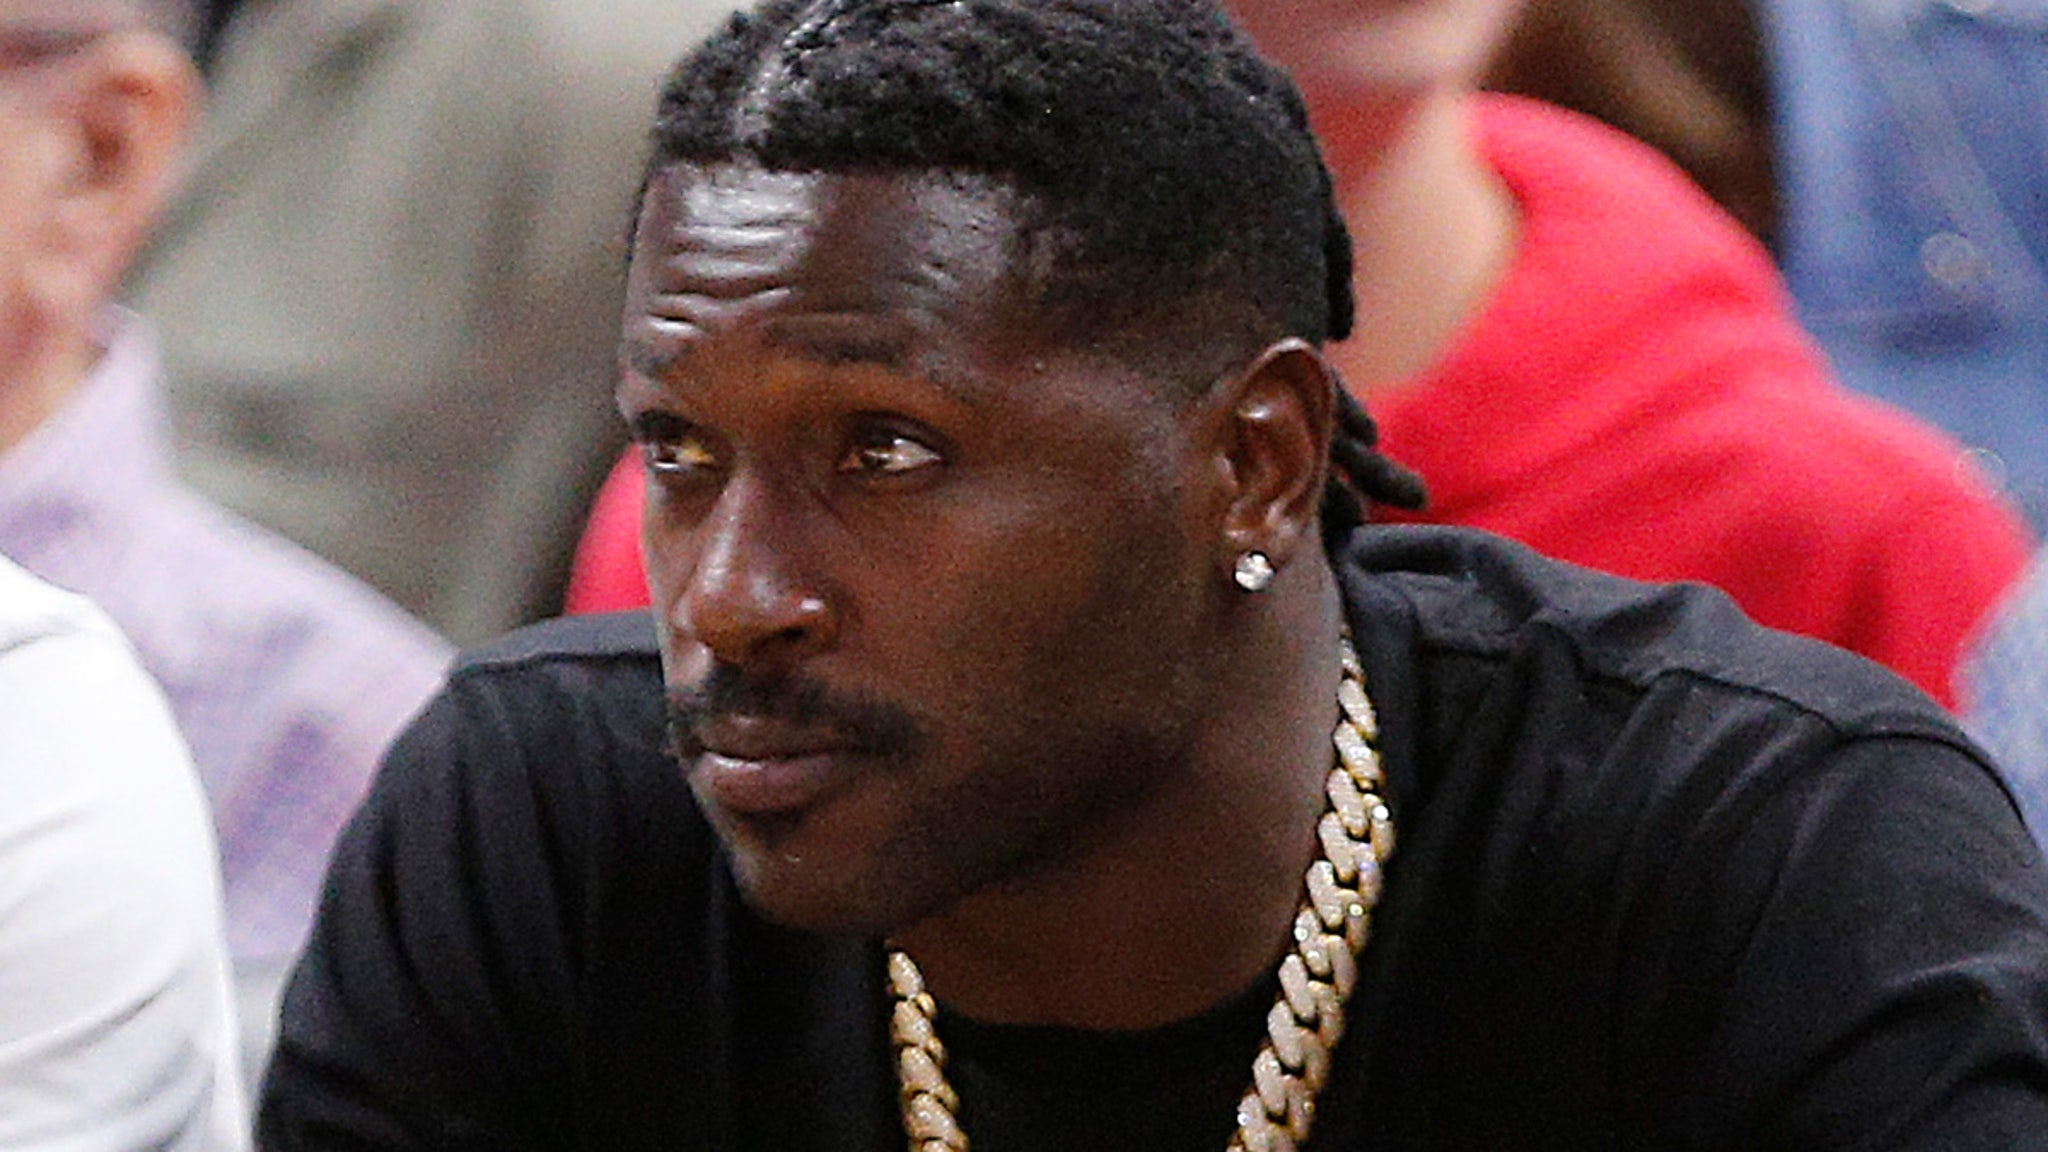 Arrest Warrant Issued For Antonio Brown After Reported Domestic Dispute